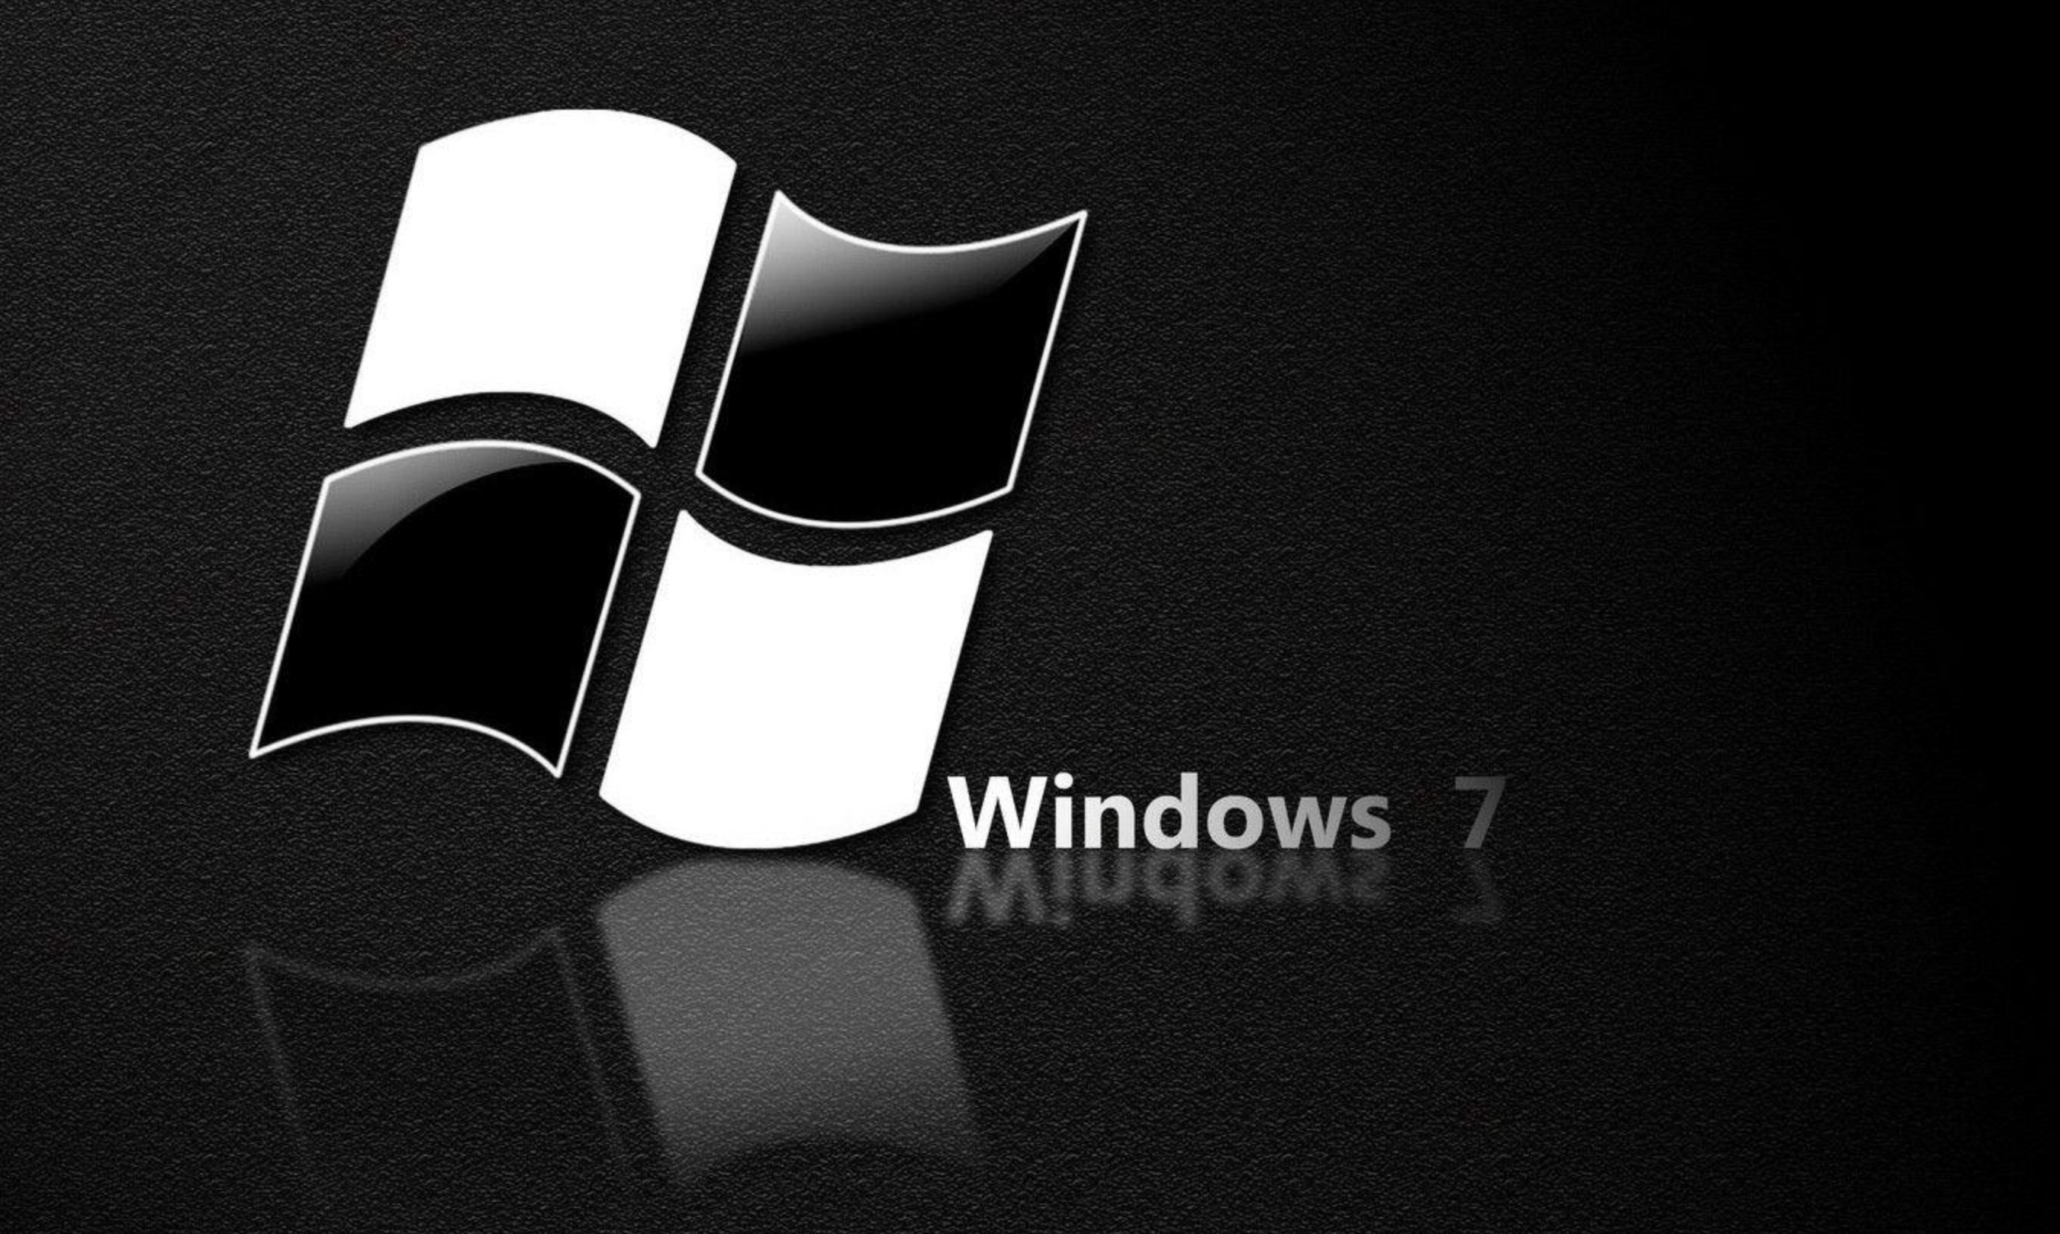 How to Fix Windows 7 Black Wallpaper Bug (Fix Promised by Microsoft)